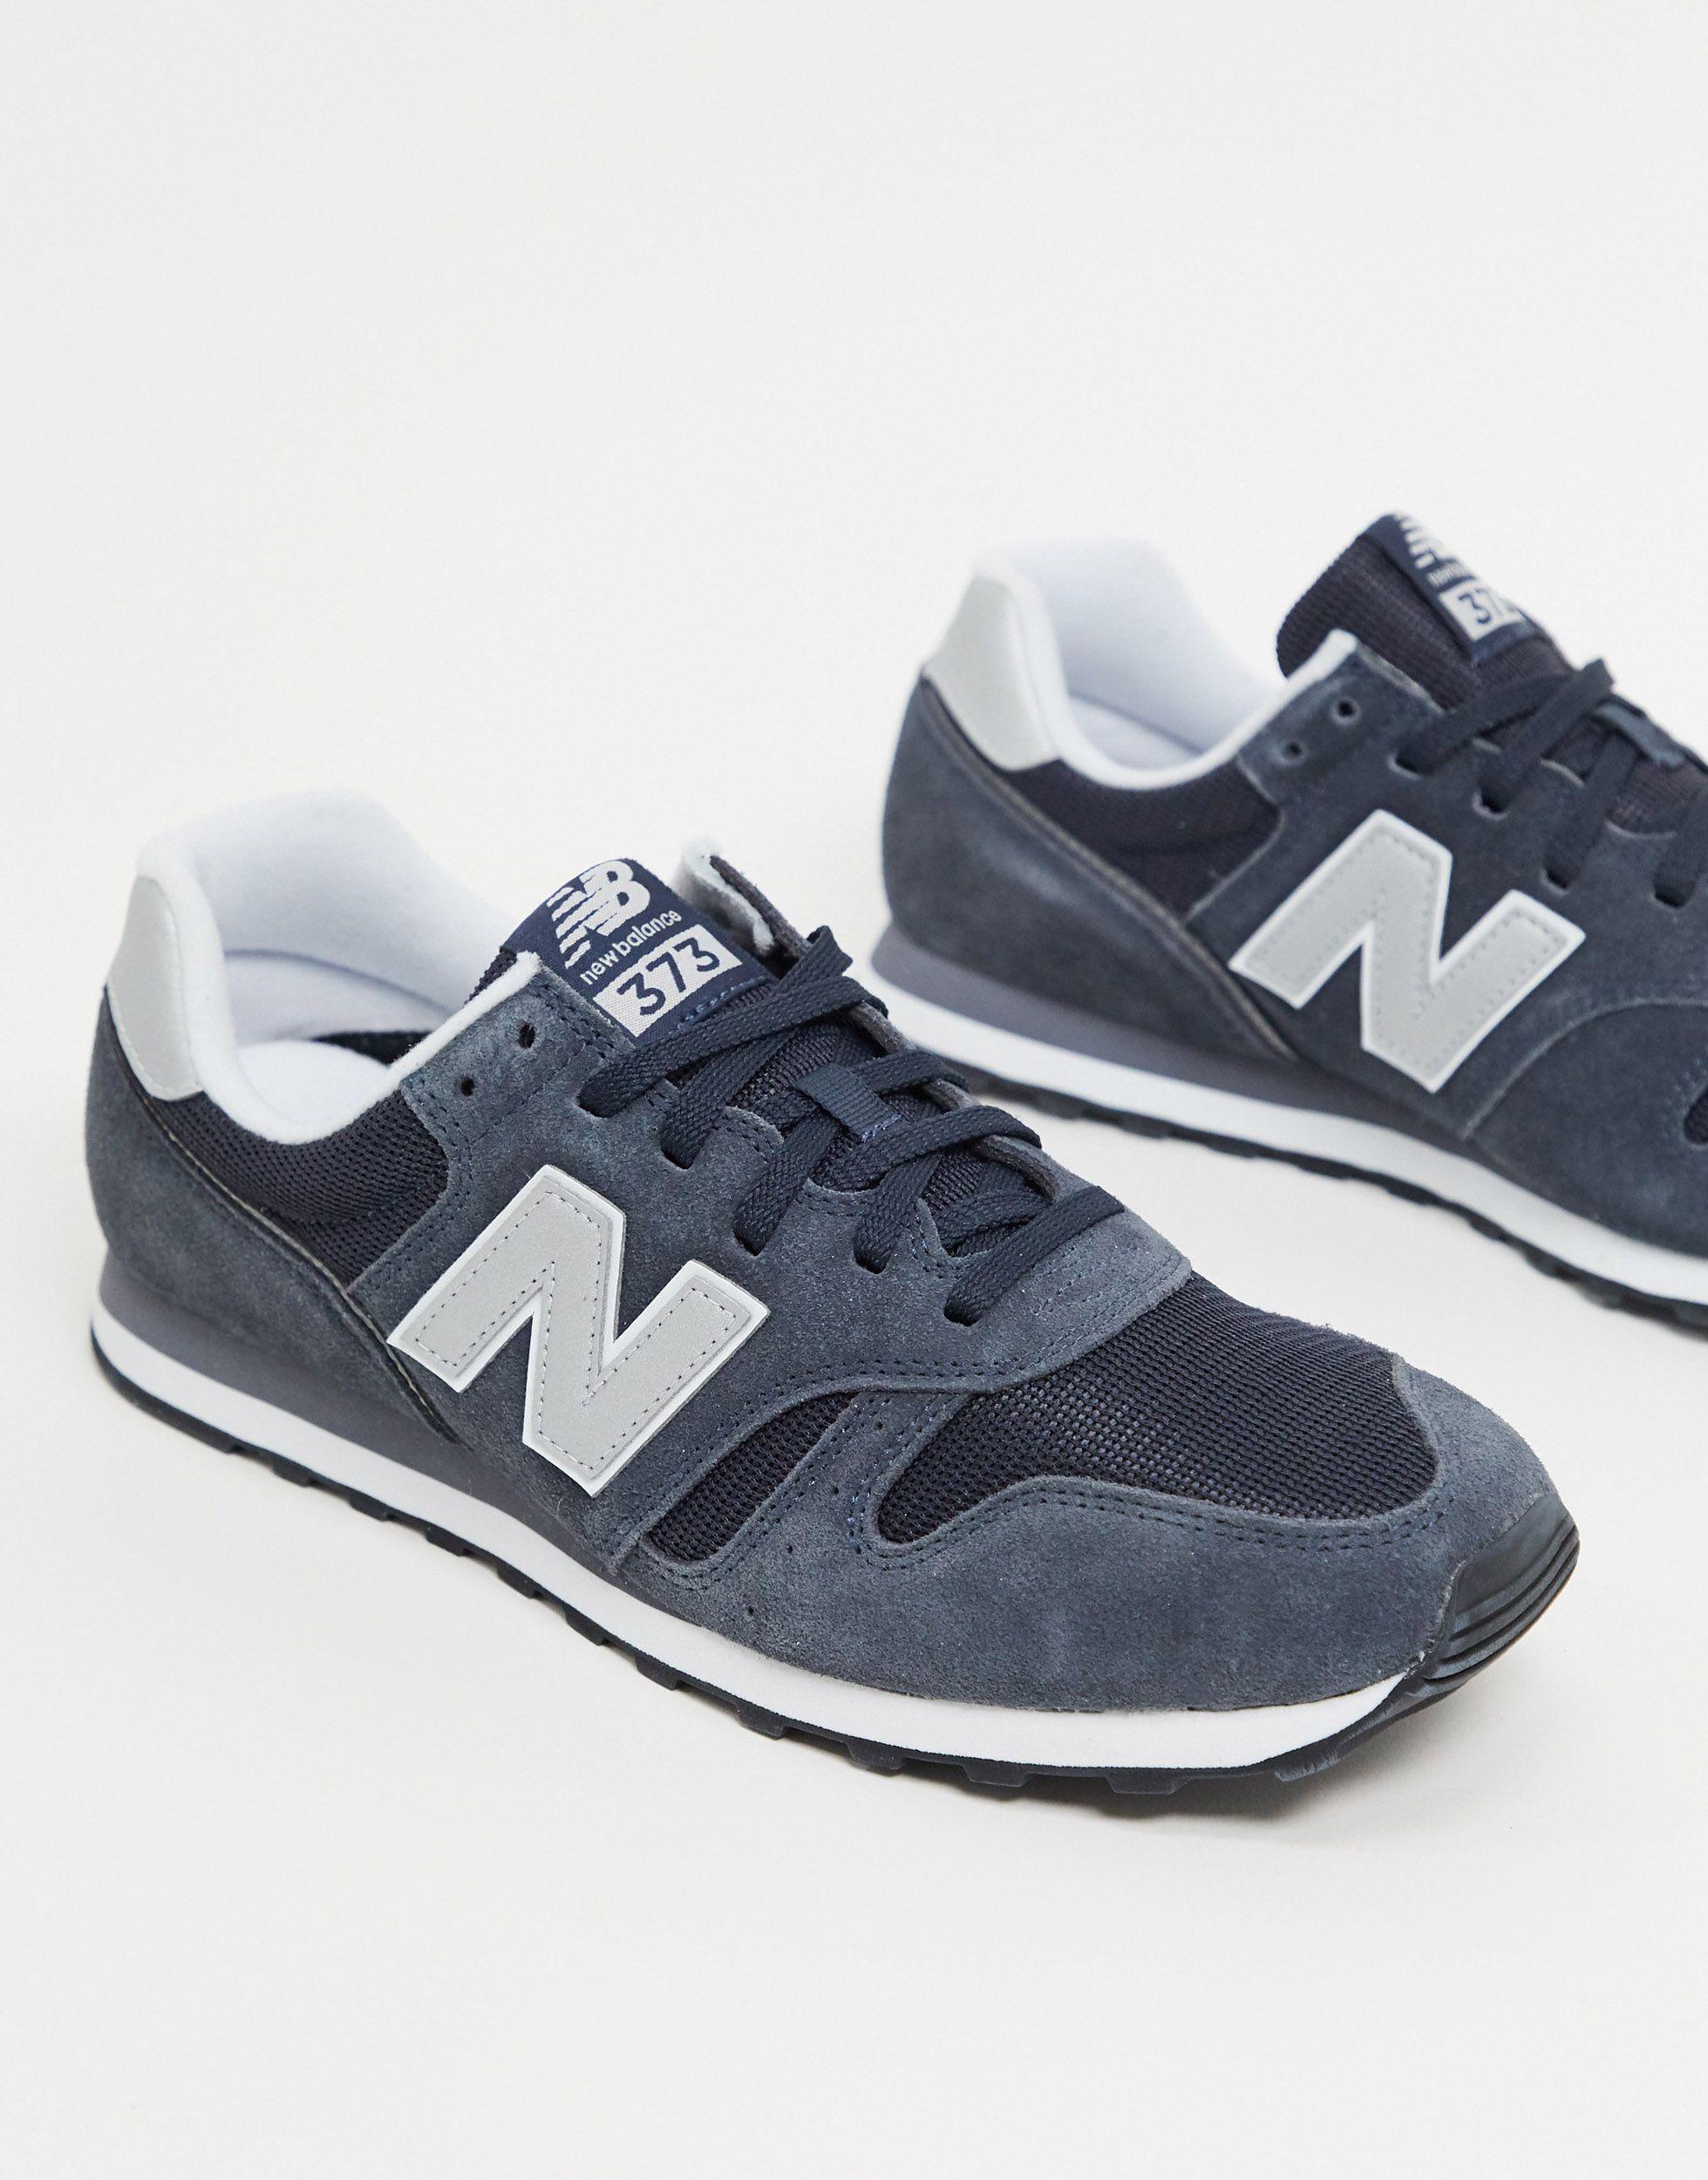 New Balance Leather 373 V2 Classic in Grey (Gray) for Men - Lyst